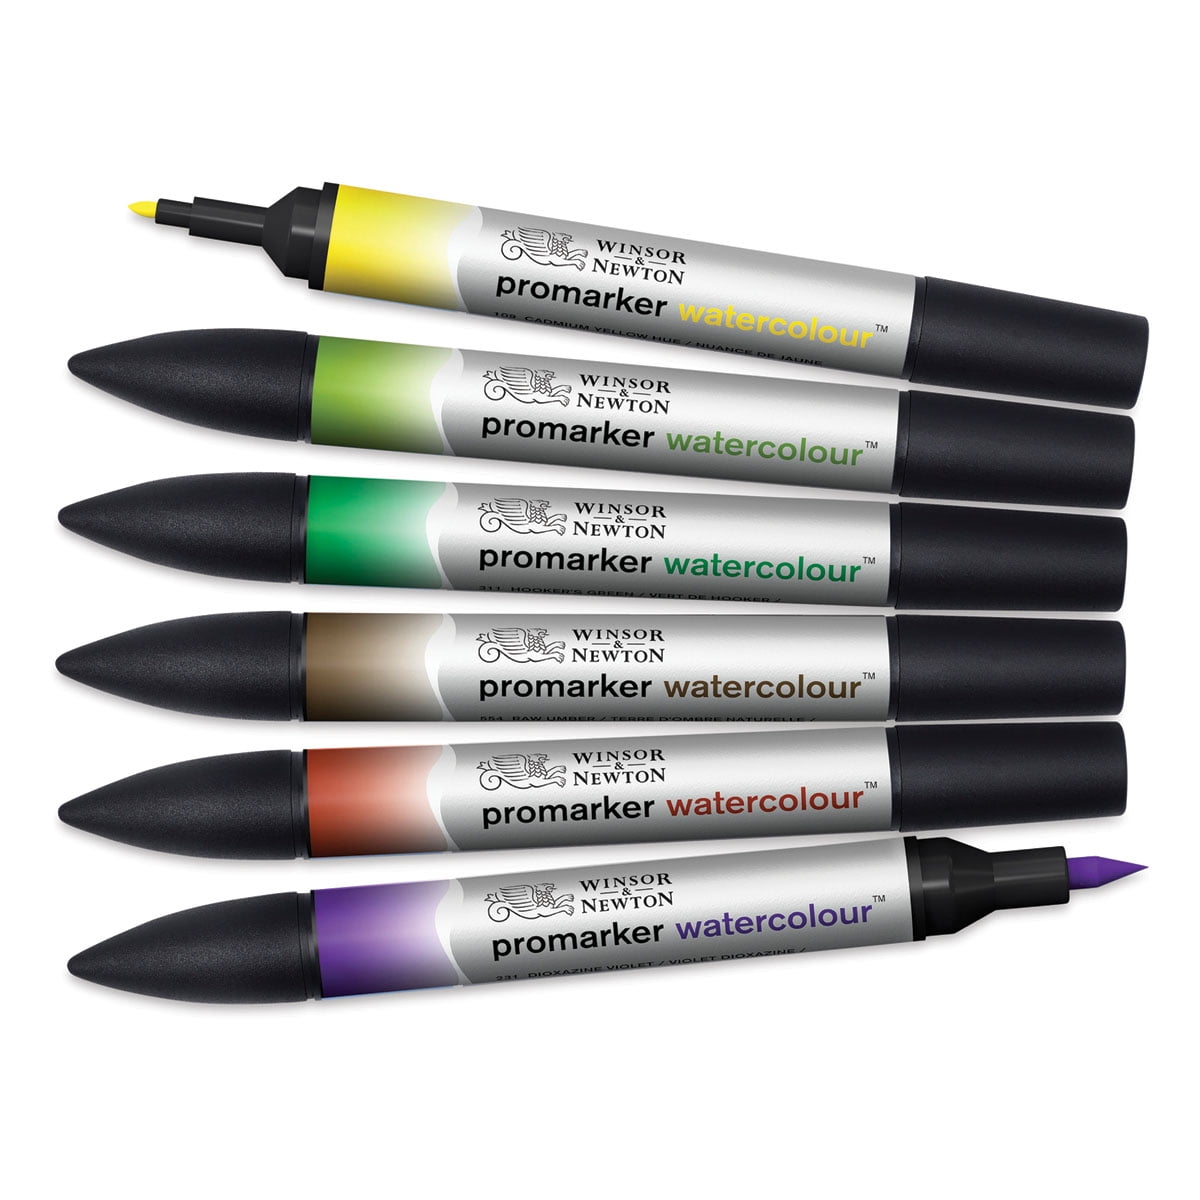 Winsor & Newton Promarker Watercolor Markers - Foliage Colors, Set of 6